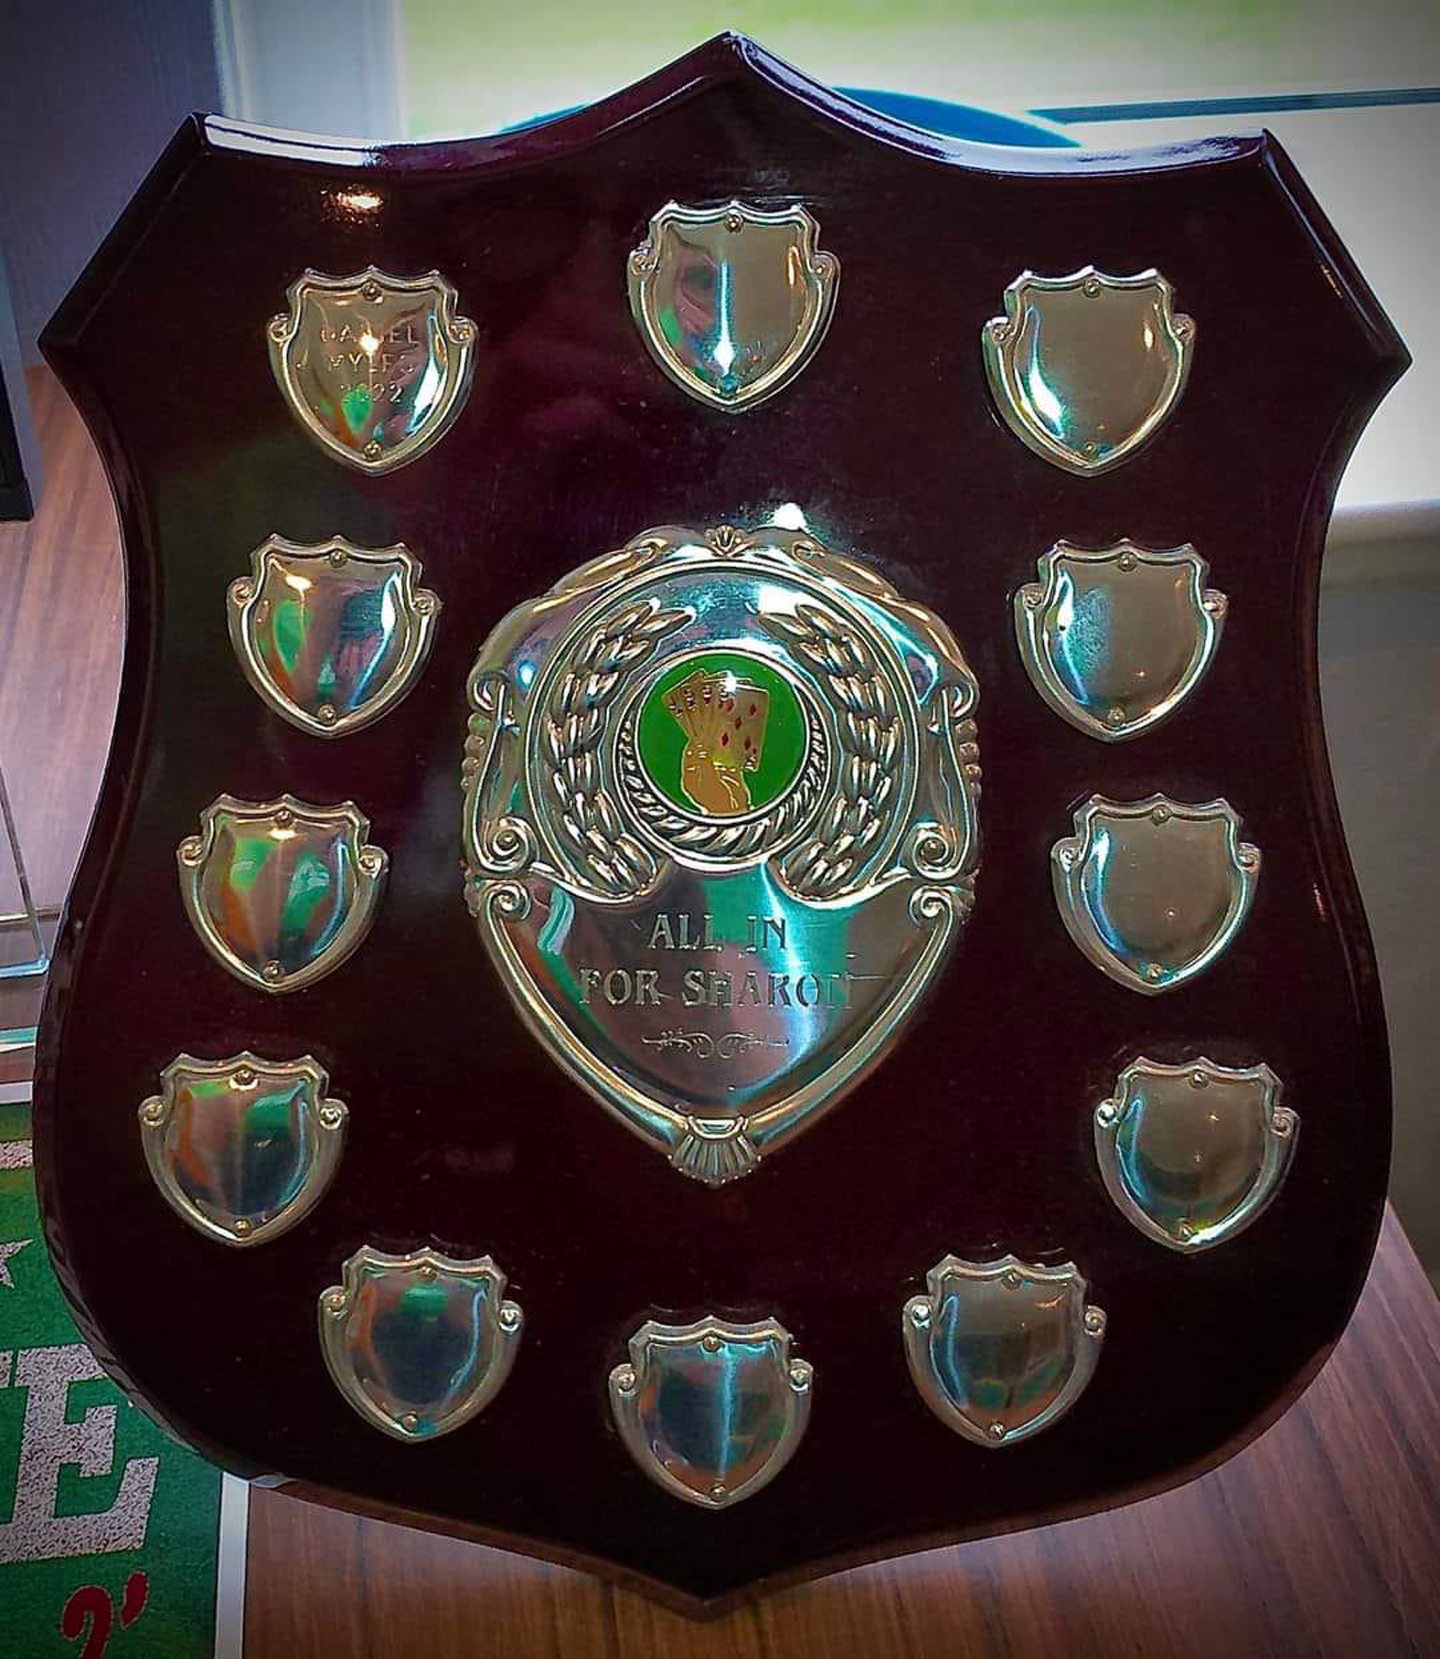 A shield which is awarded to the winners.